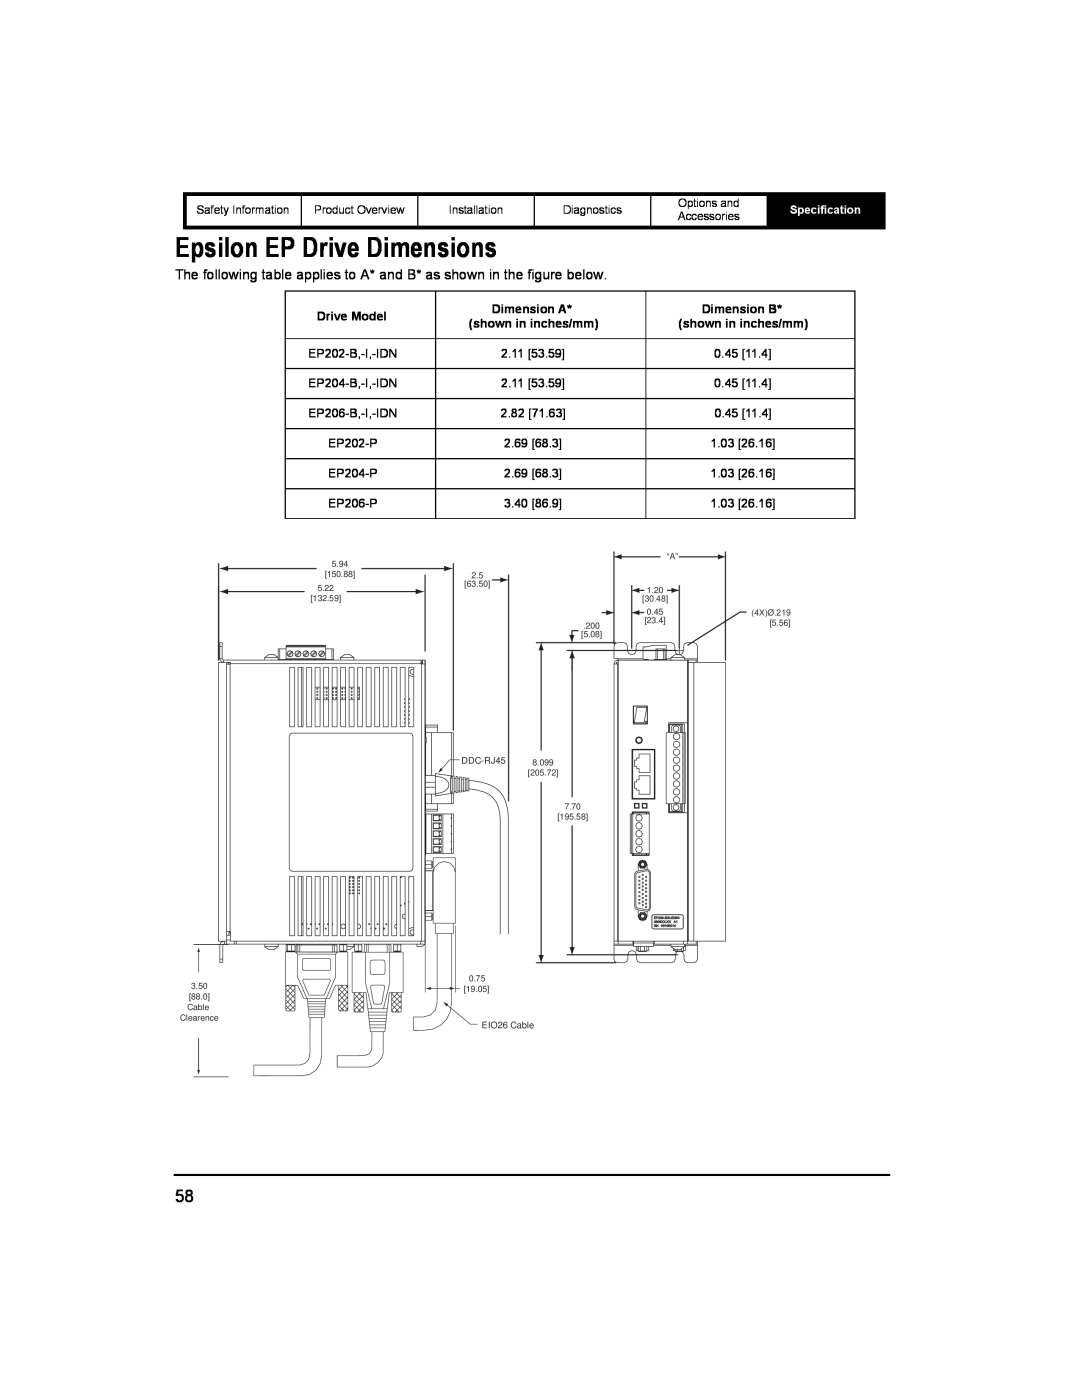 Emerson 400518-01 Epsilon EP Drive Dimensions, The following table applies to A* and B* as shown in the figure below 